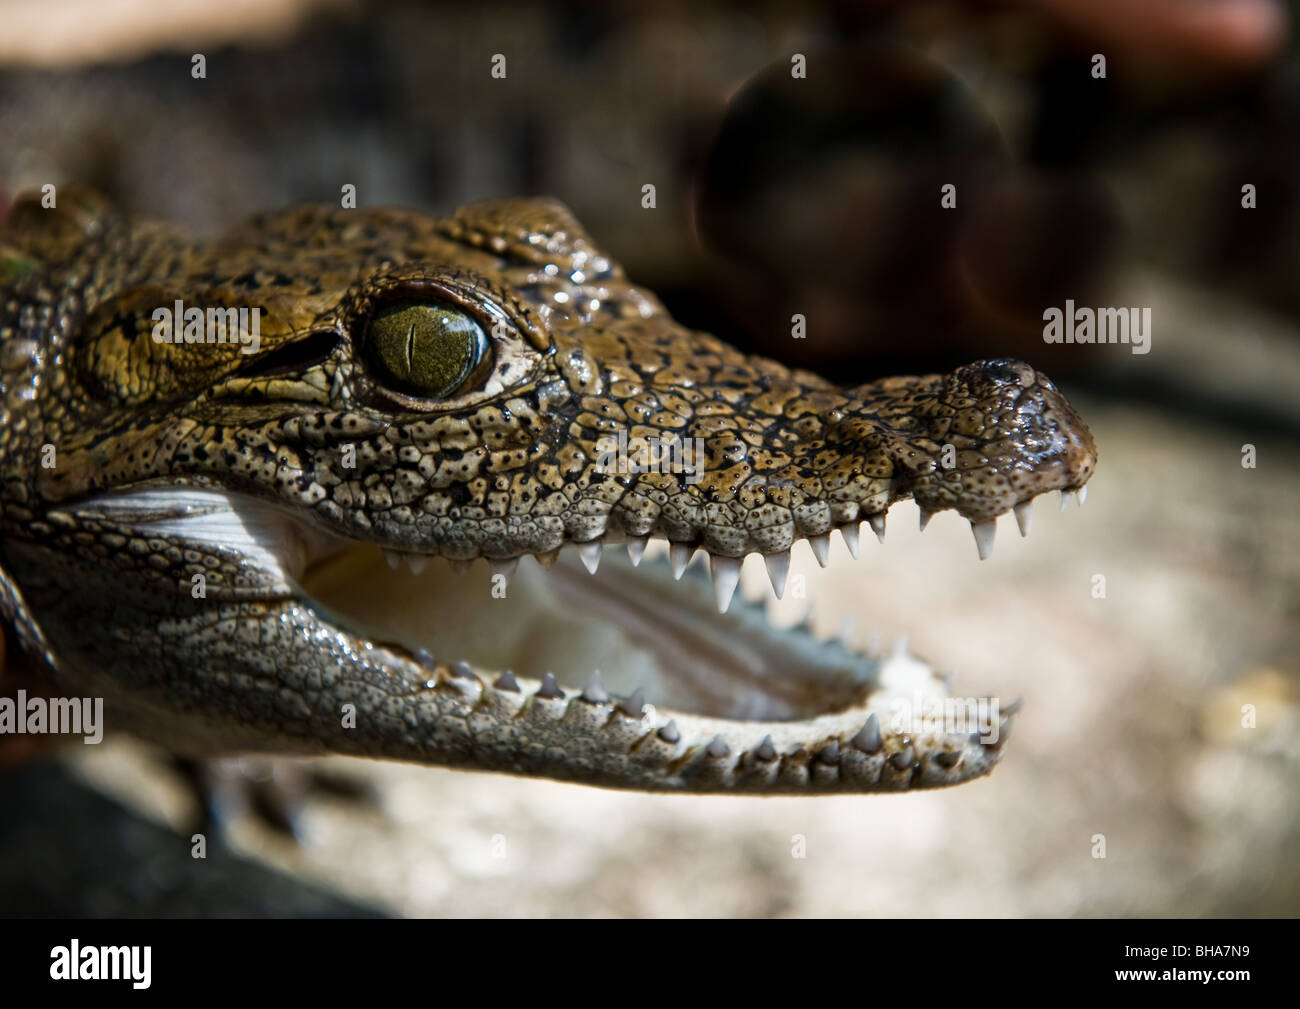 Head shot of a hand held wild baby crocodile with large watchful eyes and mouth open exposing razor sharp teeth ready to bite. Stock Photo